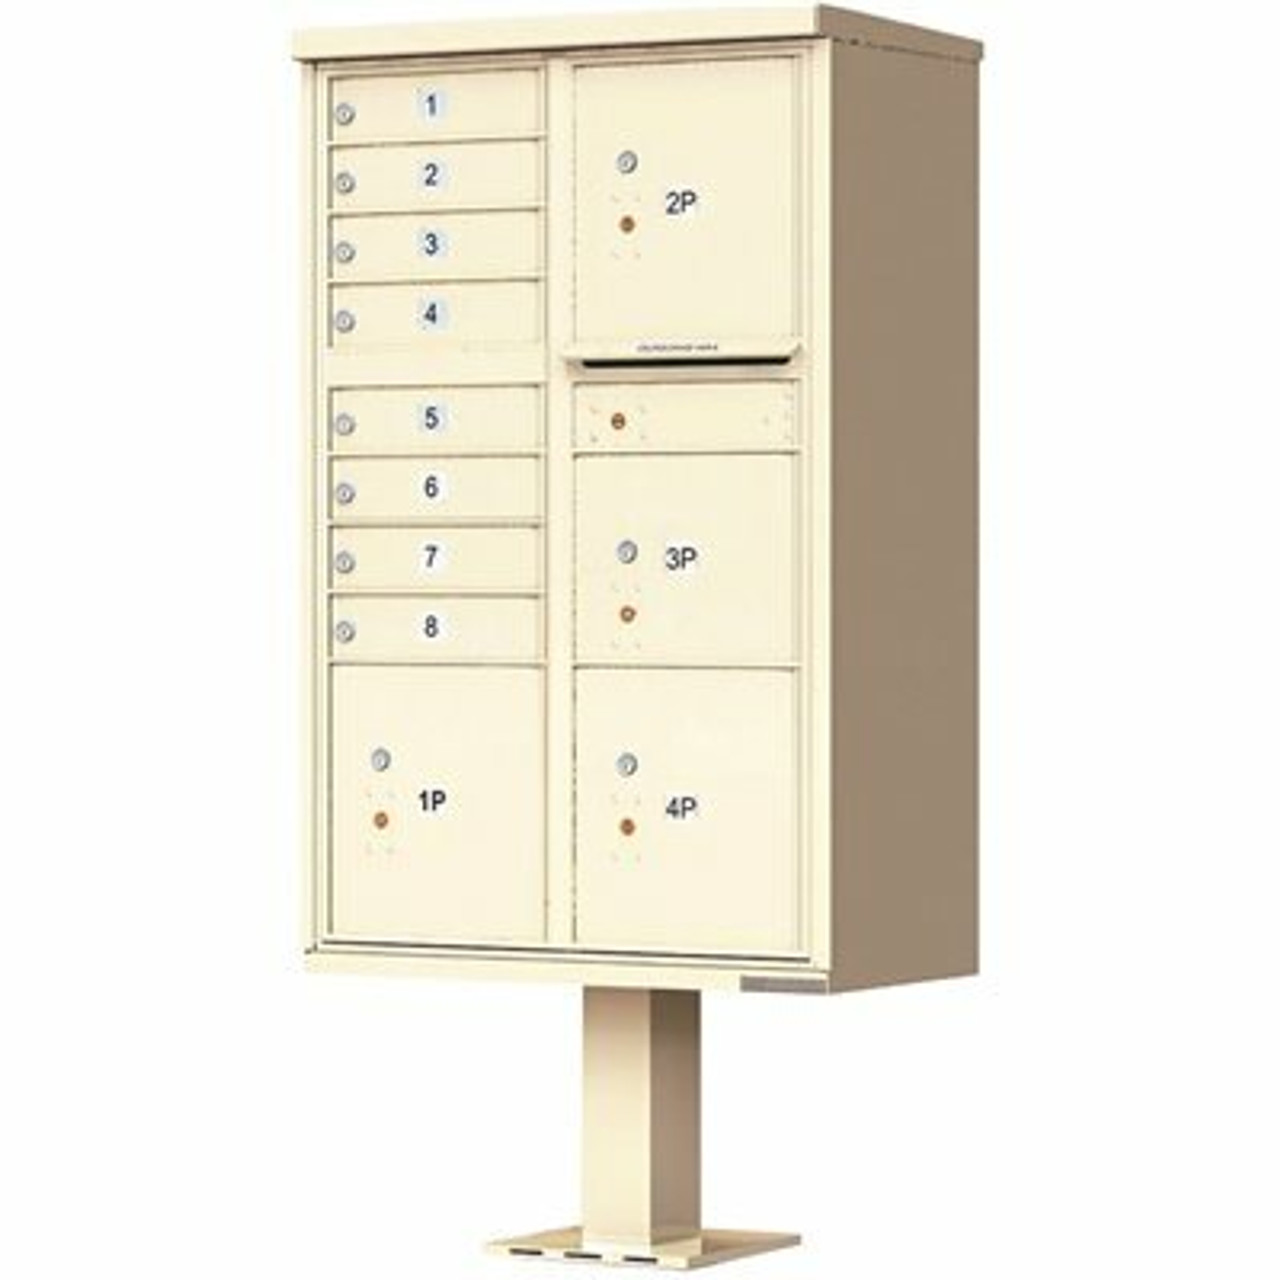 Florence 1570 Series 8-Mailboxes, 1-Outgoing Compartment, 4-Parcel Lockers, Vital Cluster Box Unit - 2474392